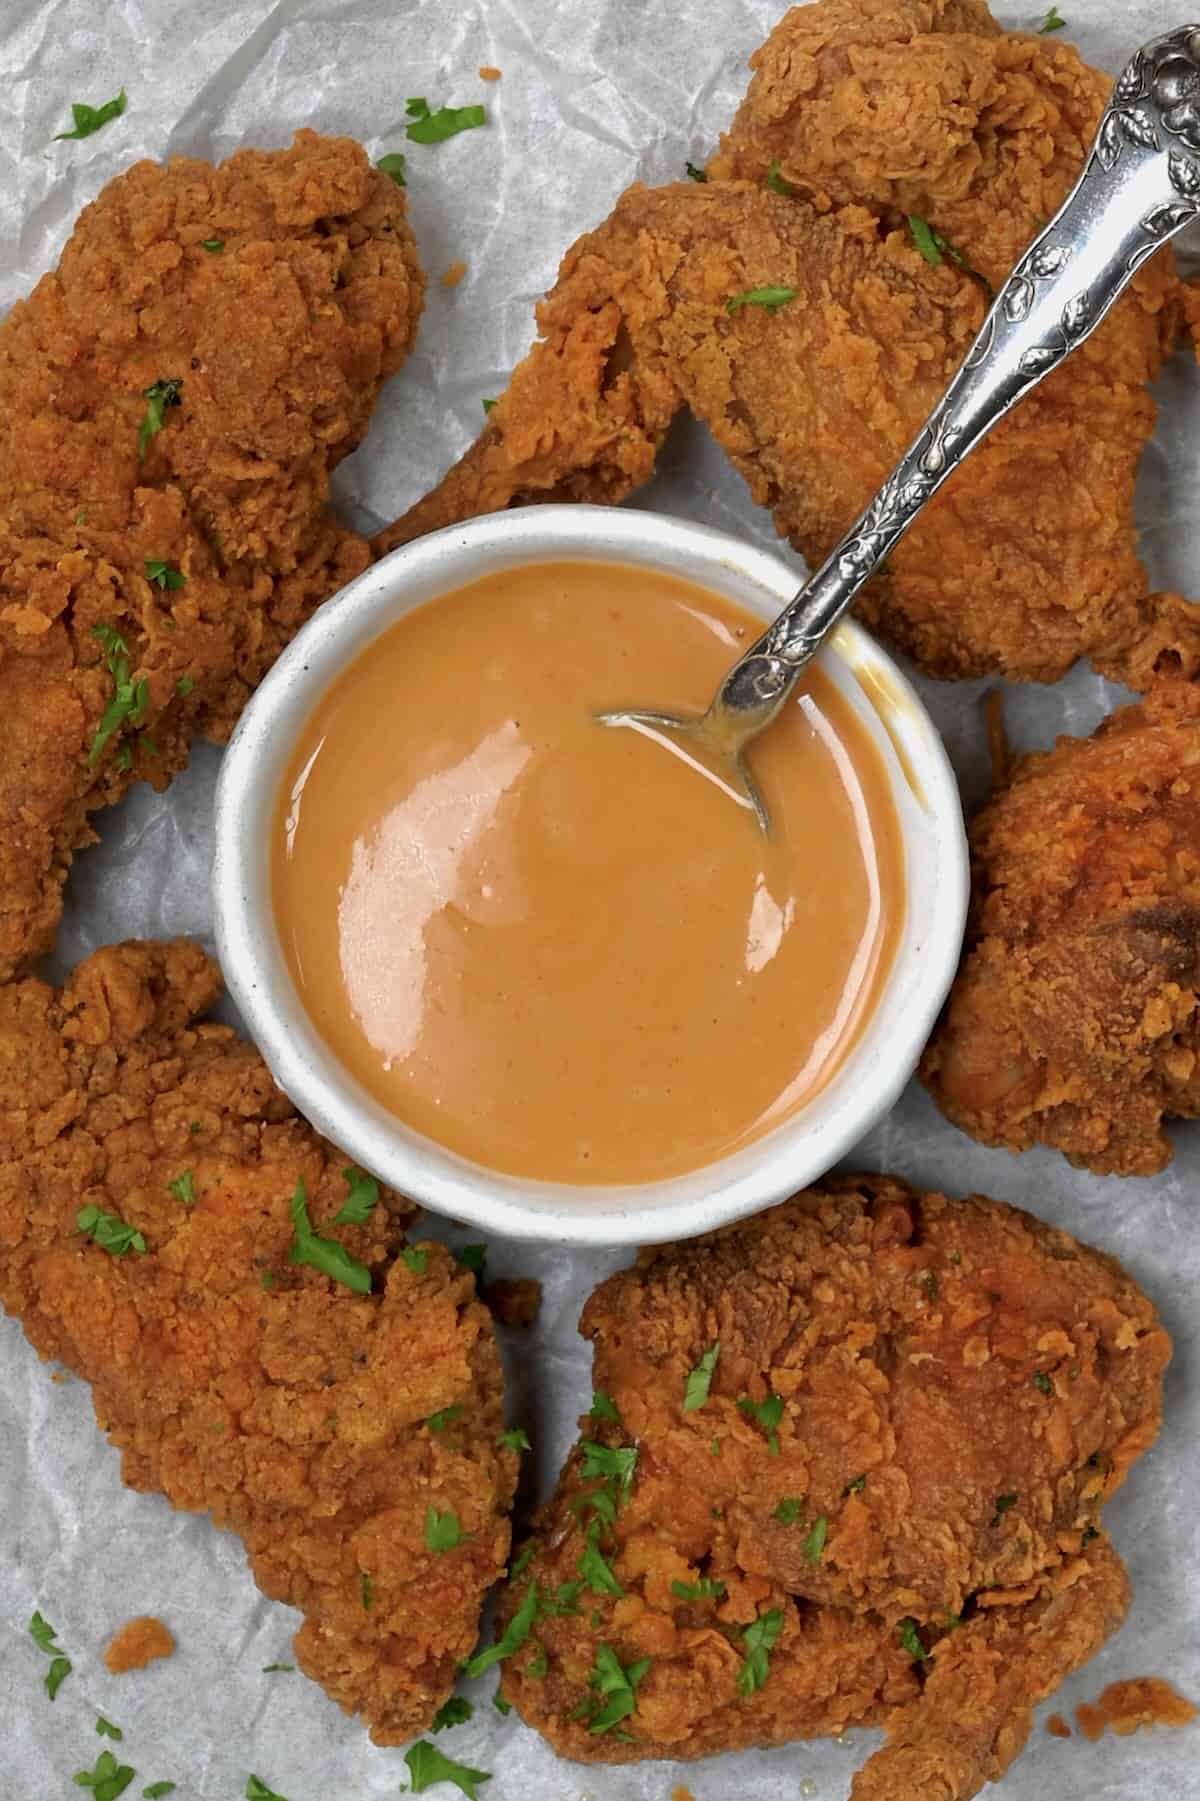 Homemade chick fil a sauce in a small bowl